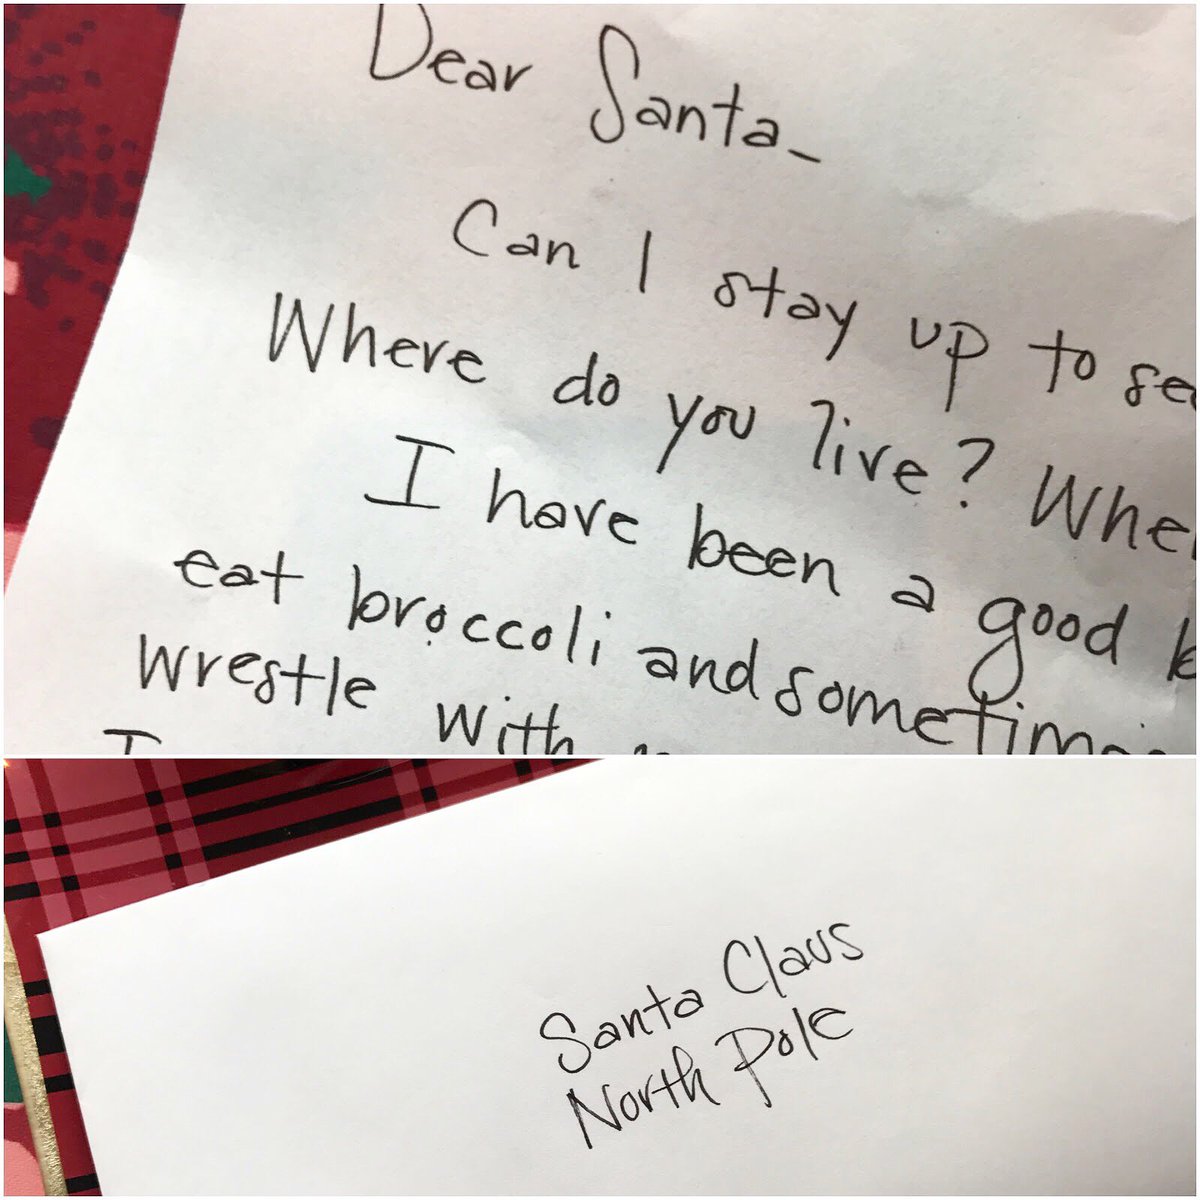 Letters to Santa complete ???????????? To the #NorthPole they go! ❄️???? https://t.co/kjgo5YLoEx